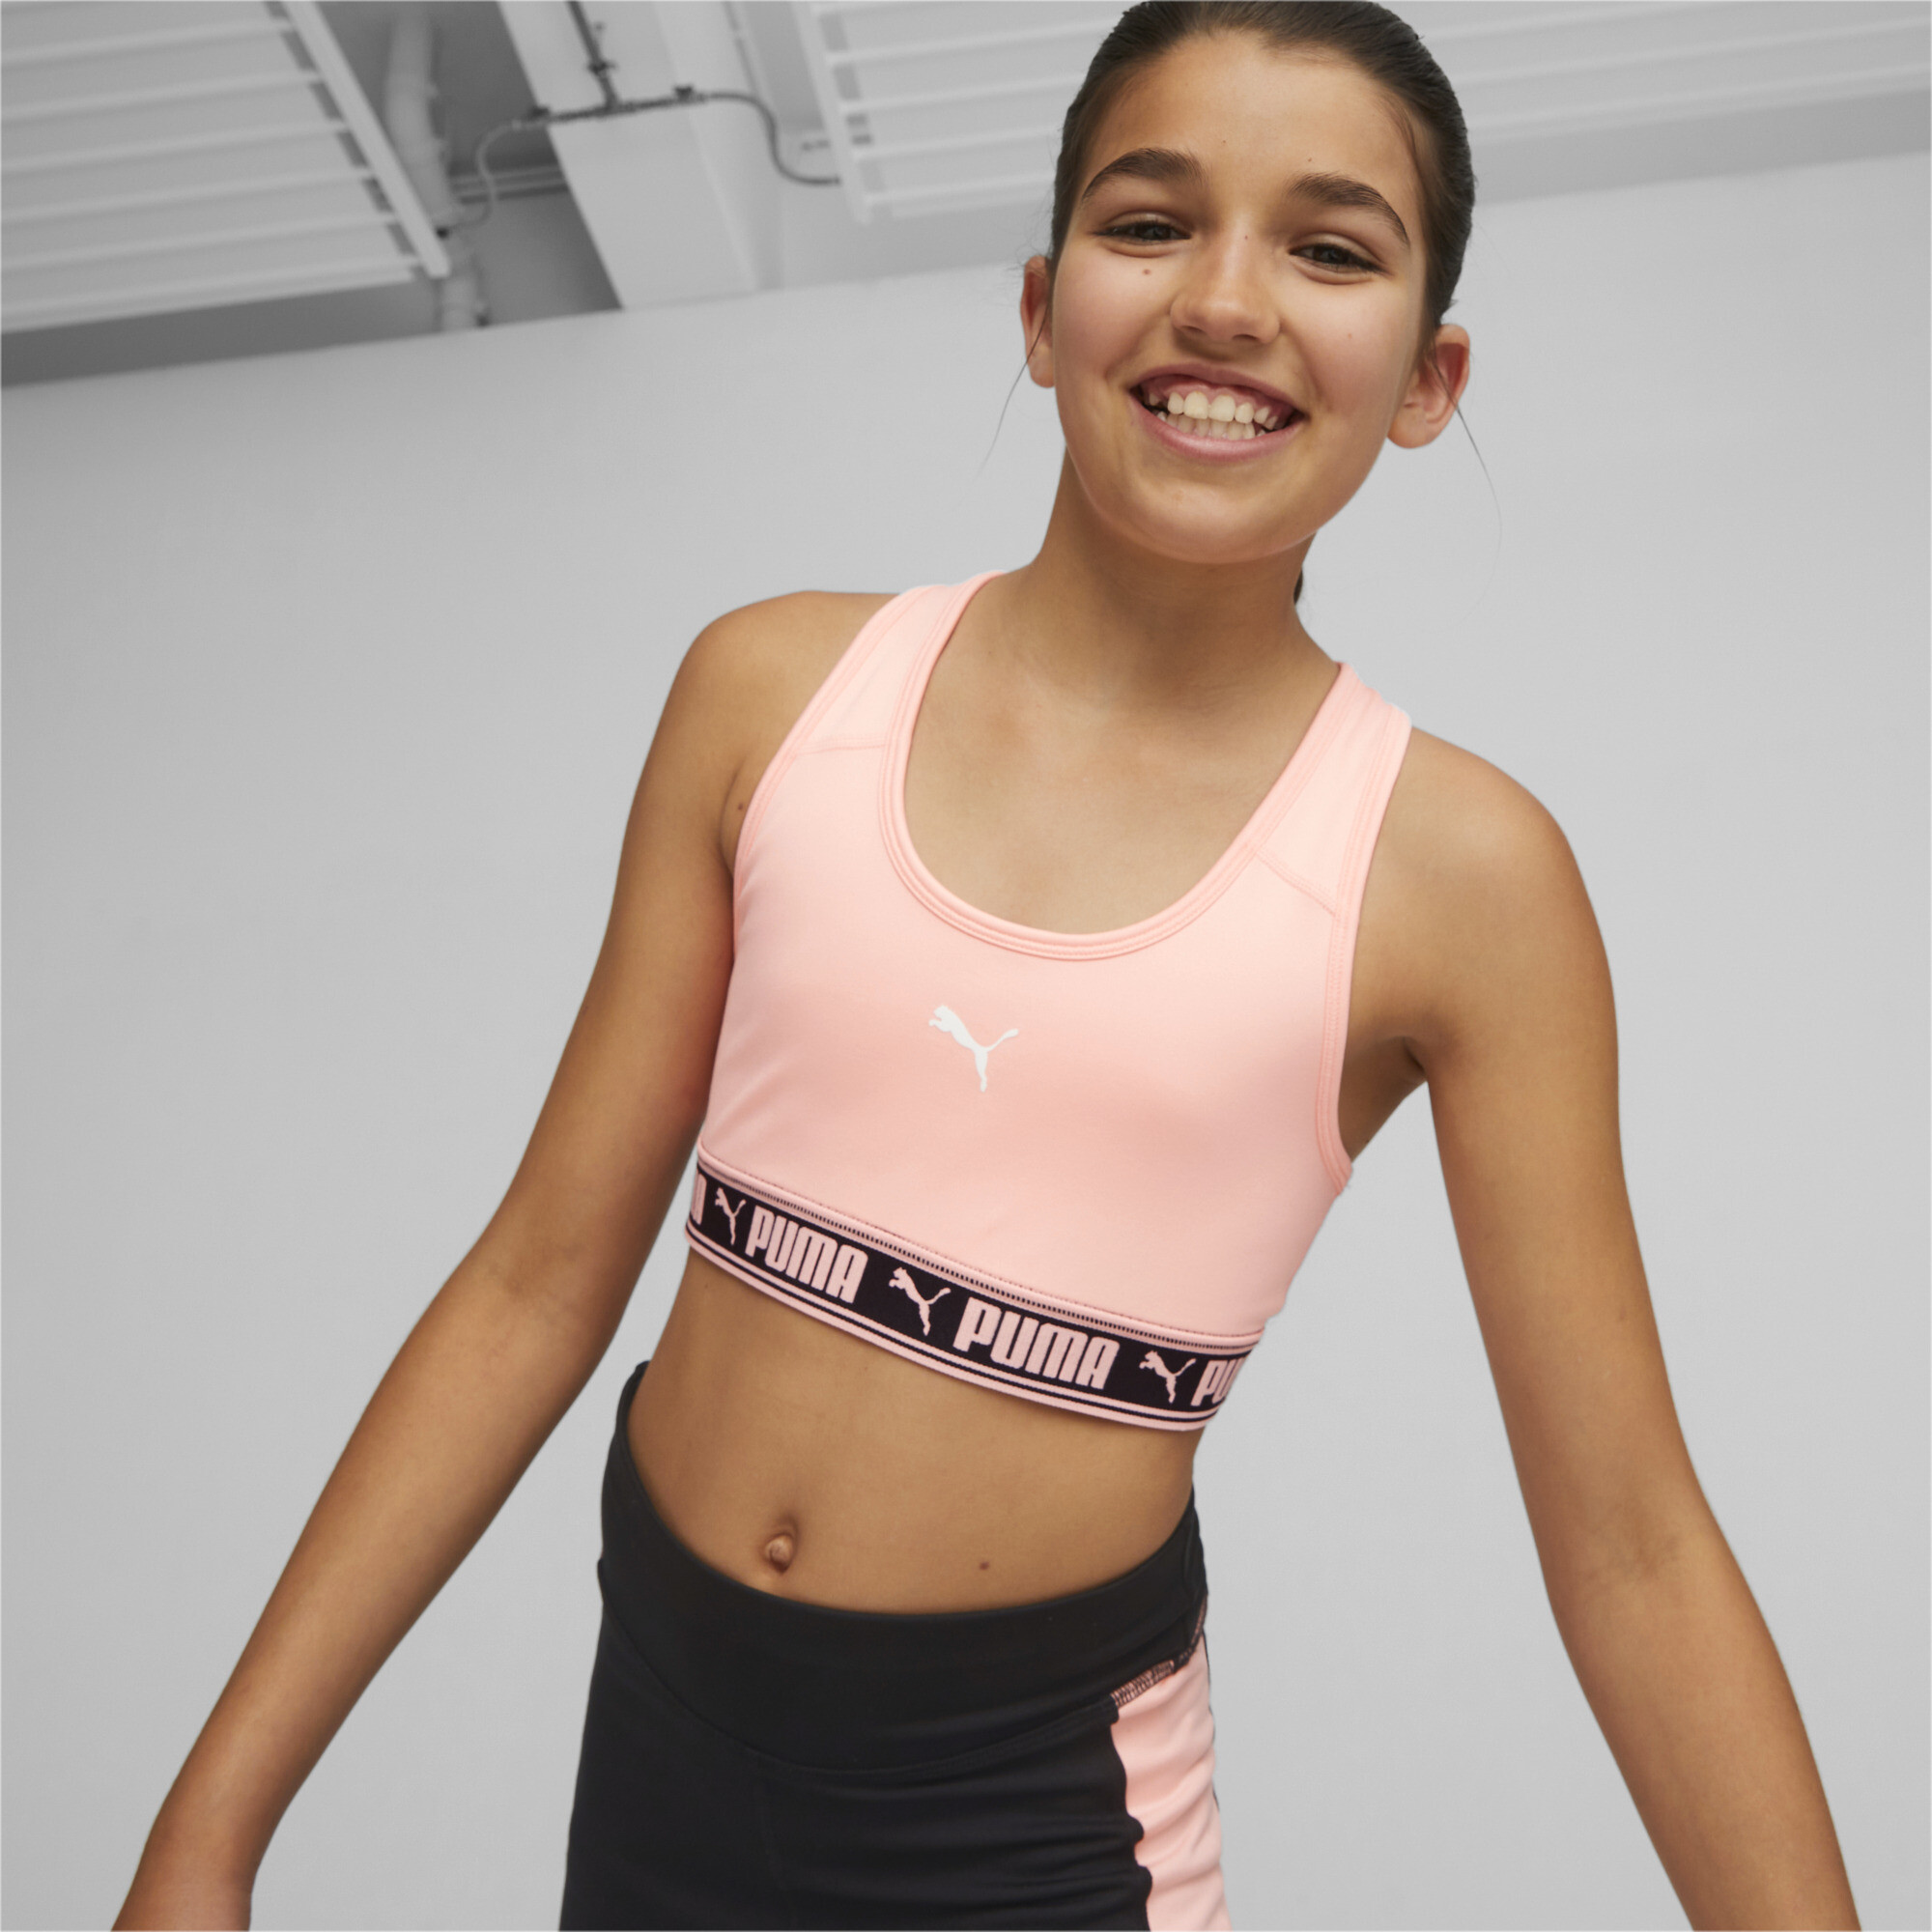 Women's Puma Strong Bra Youth, Pink, Size 9-10Y, Clothing